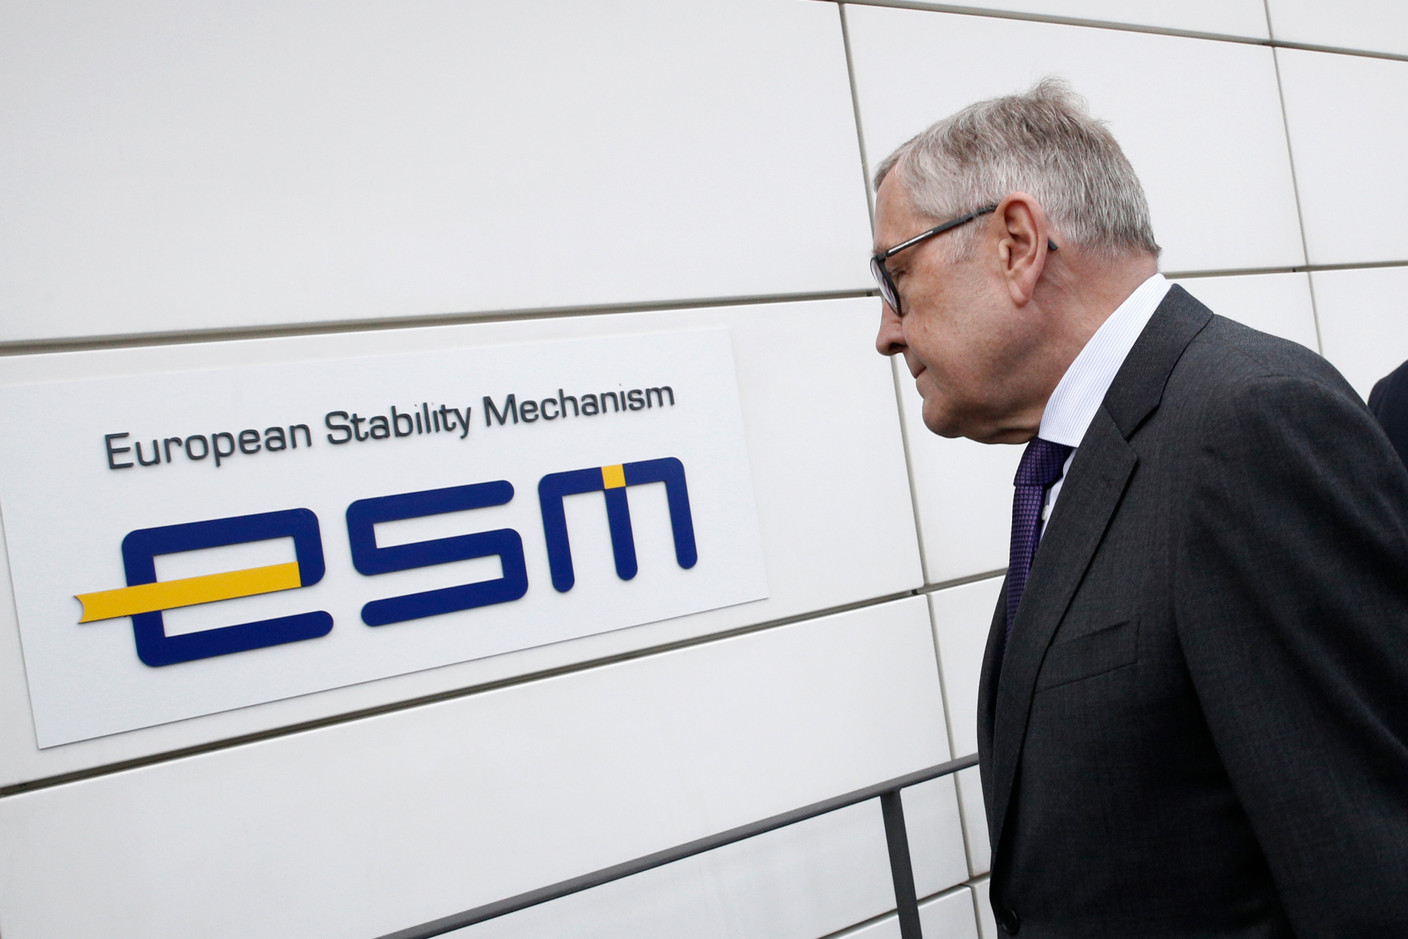 Klaus Regling, the current managing director of the European Stability Mechanism, will step down on 7 October 2022. The ESM’s Governing Council will hold an emergency meeting on 6 October to find a temporary successor. Photo: Shutterstock